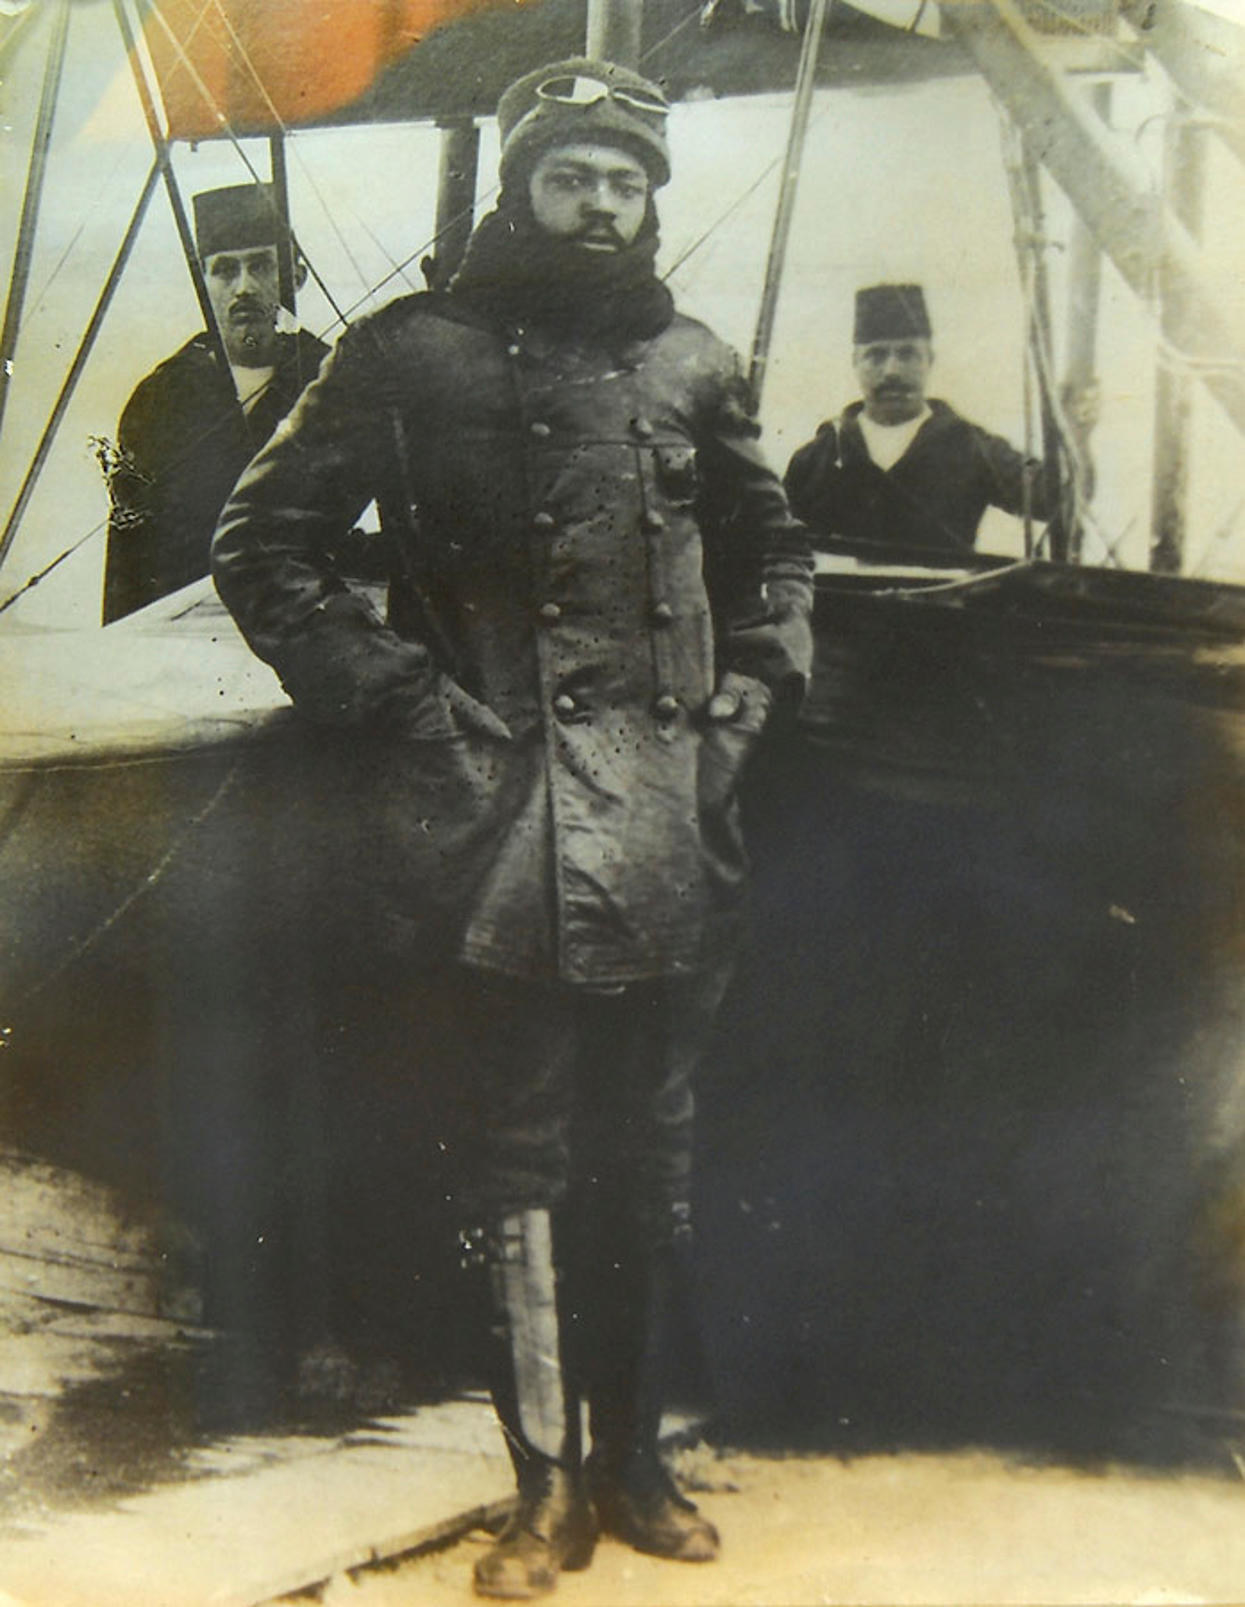 A man with high boots and in a uniform stands in front of an early plane